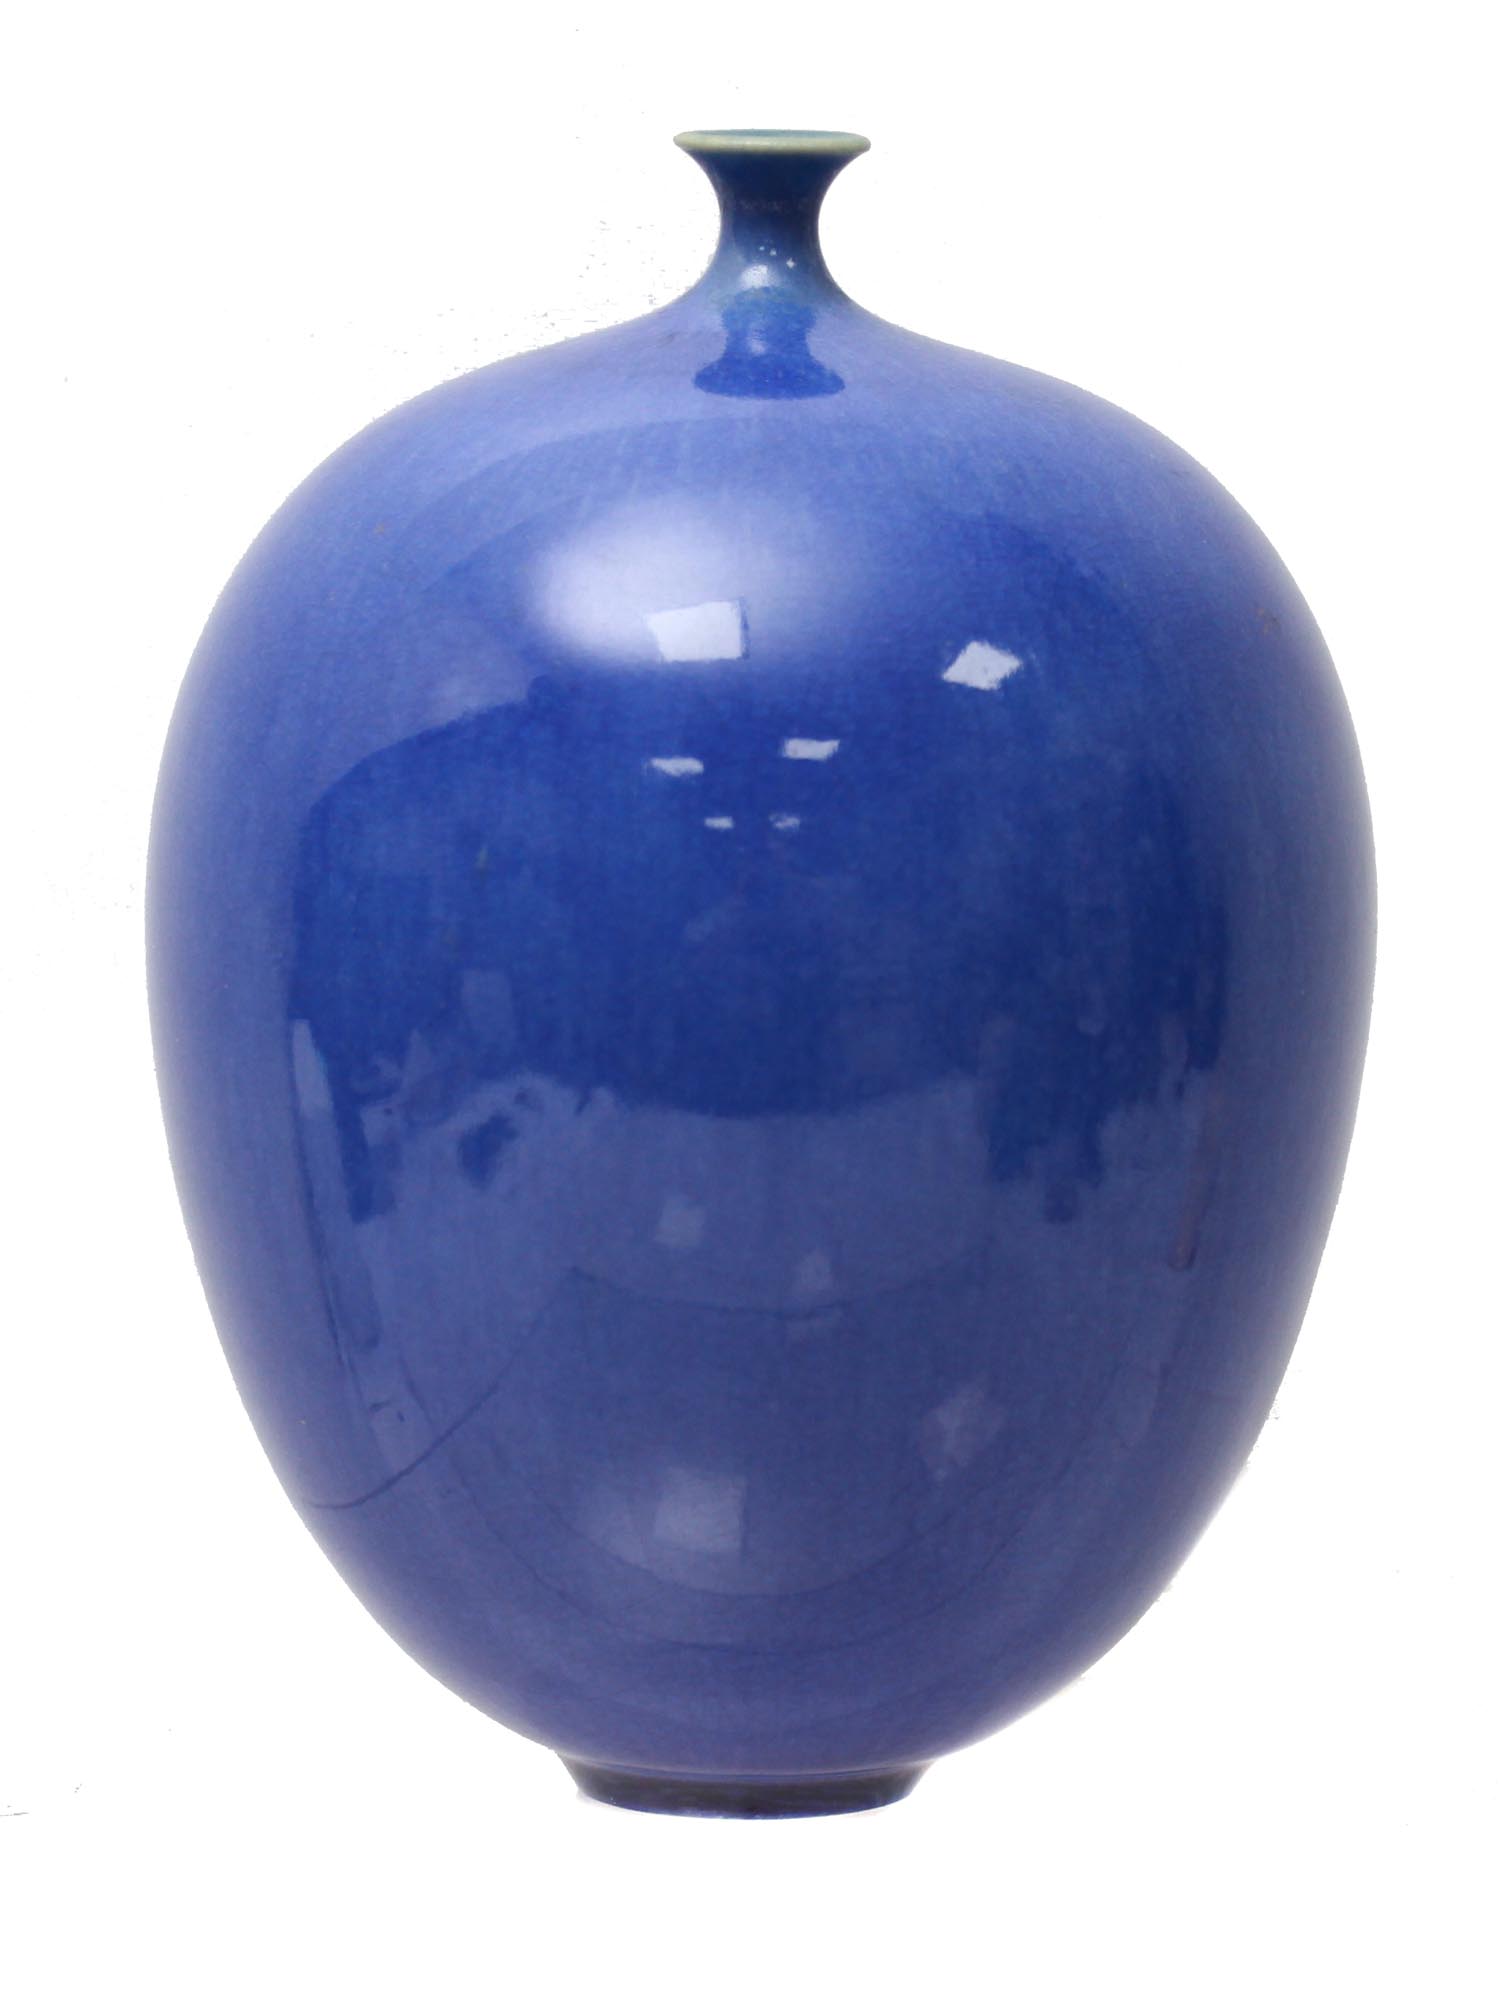 A CONTEMPORARY GLAZED ART POTTERY VASE BY IHRMAN PIC-2